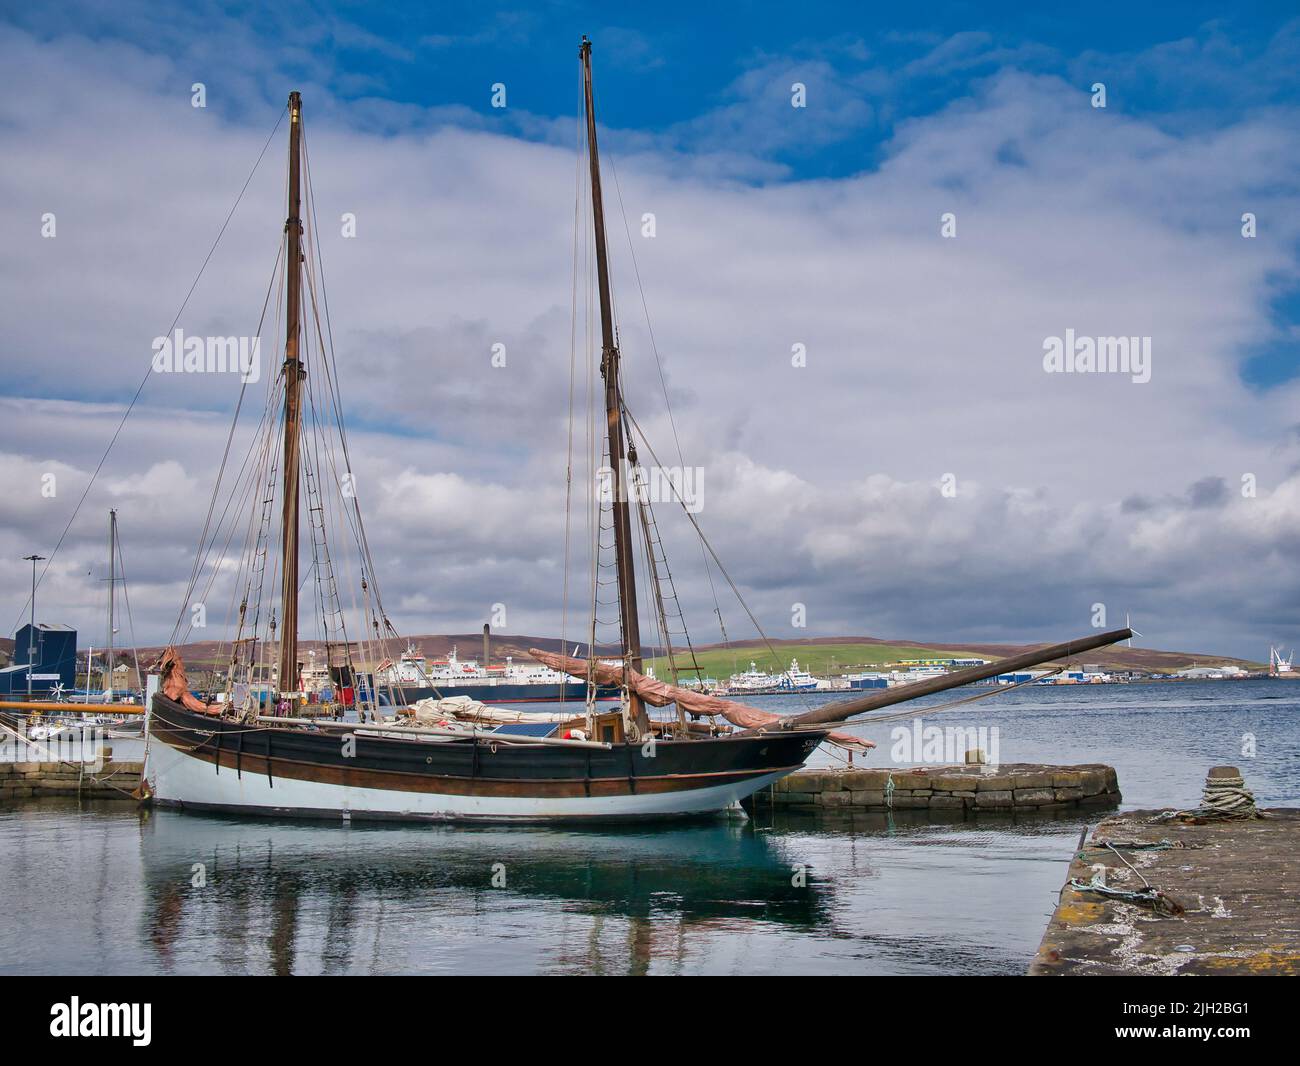 The two masted, unpowered sailing ship Swallow, registered in Gdansk and moored at Hays Dock in Lerwick, Shetland, Scotland, UK. Taken on a calm, sunn Stock Photo